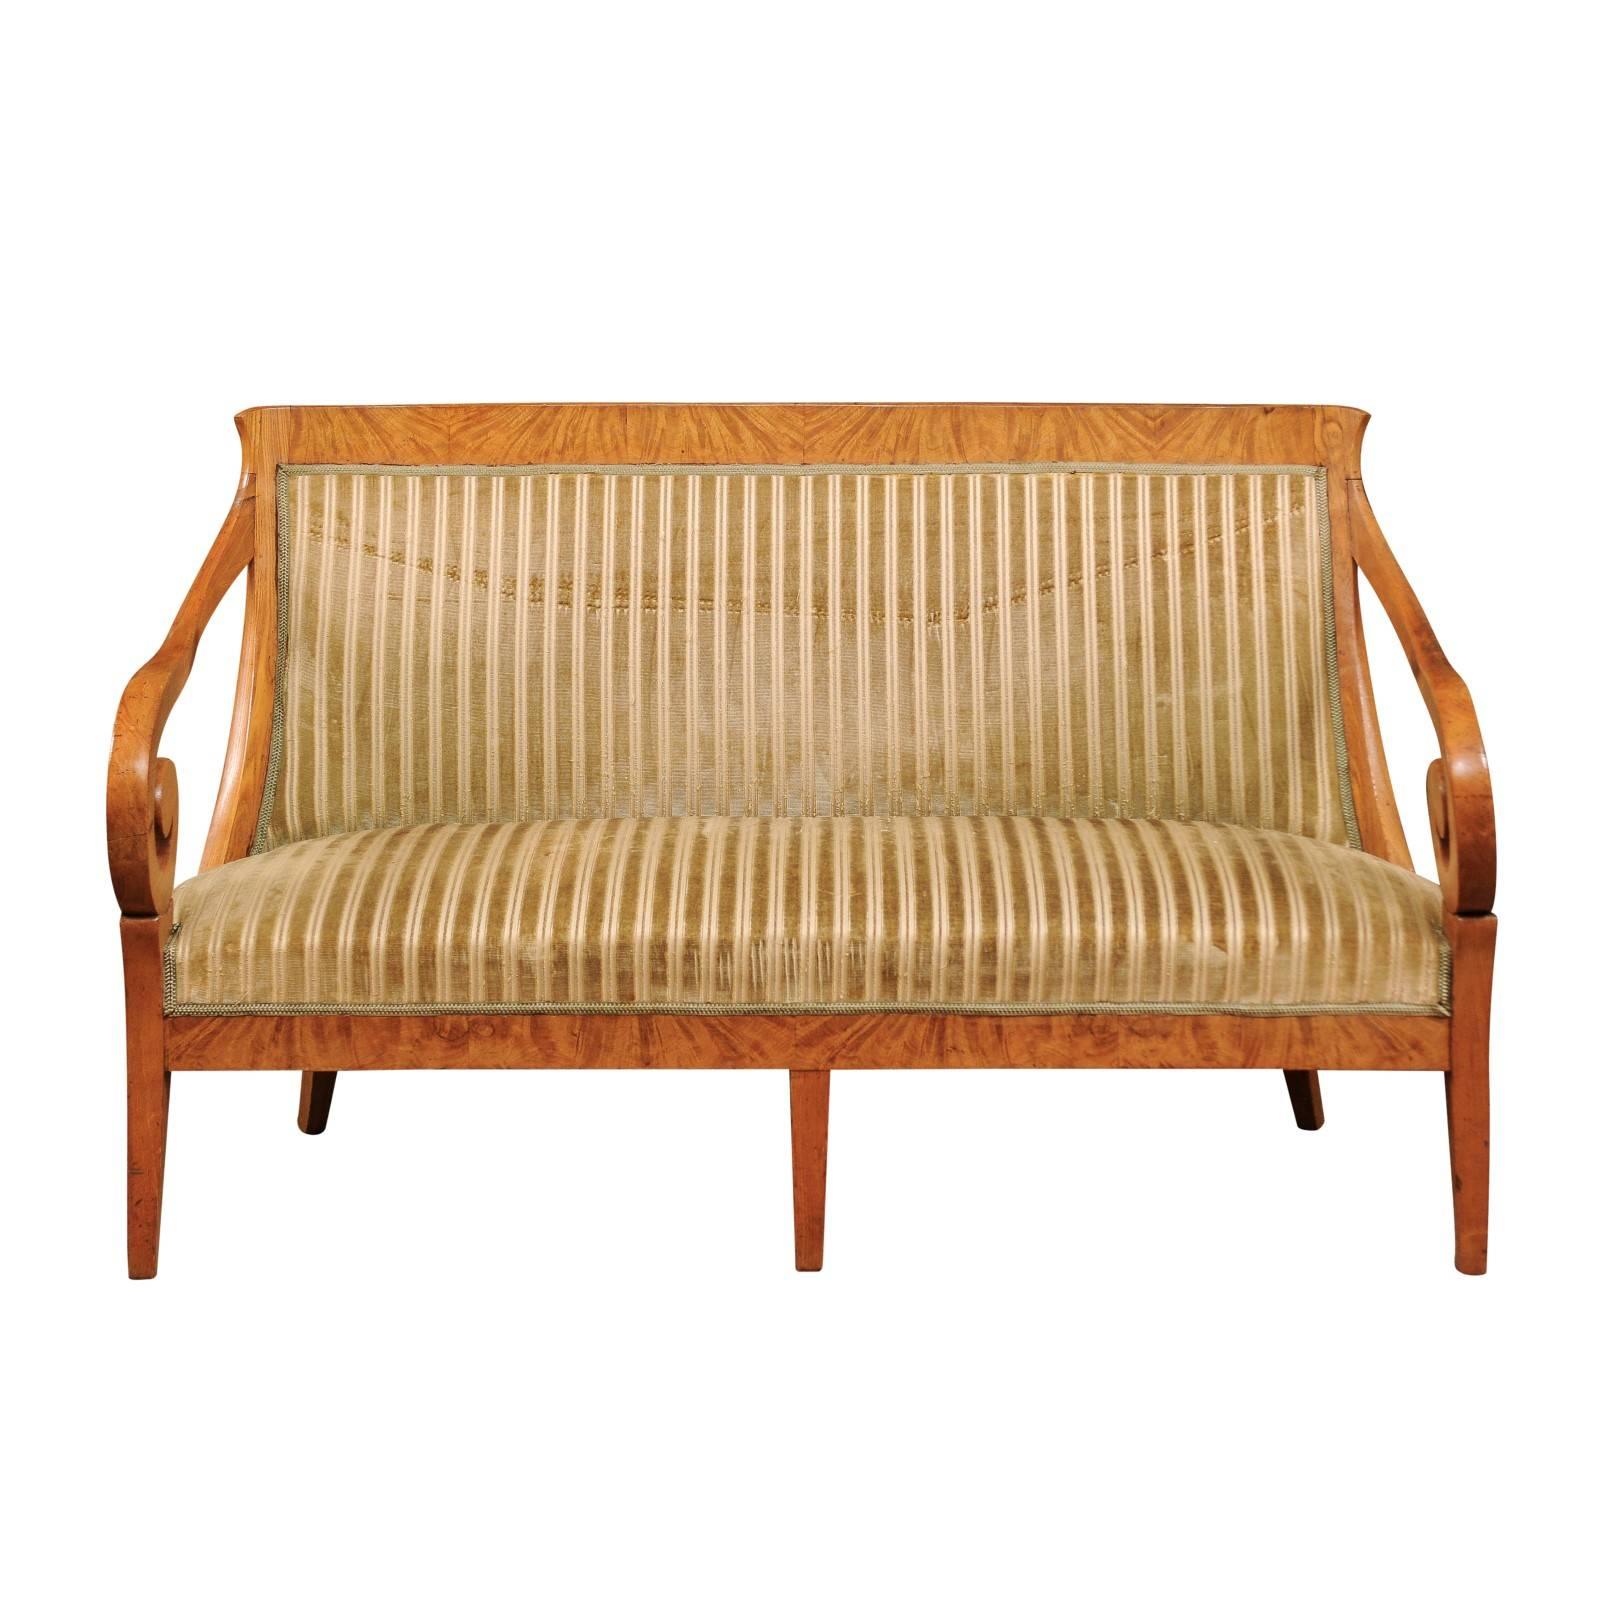 Early 19th Biedermeier Settee with Scroll Arms and Curved Back in Birch Wood For Sale